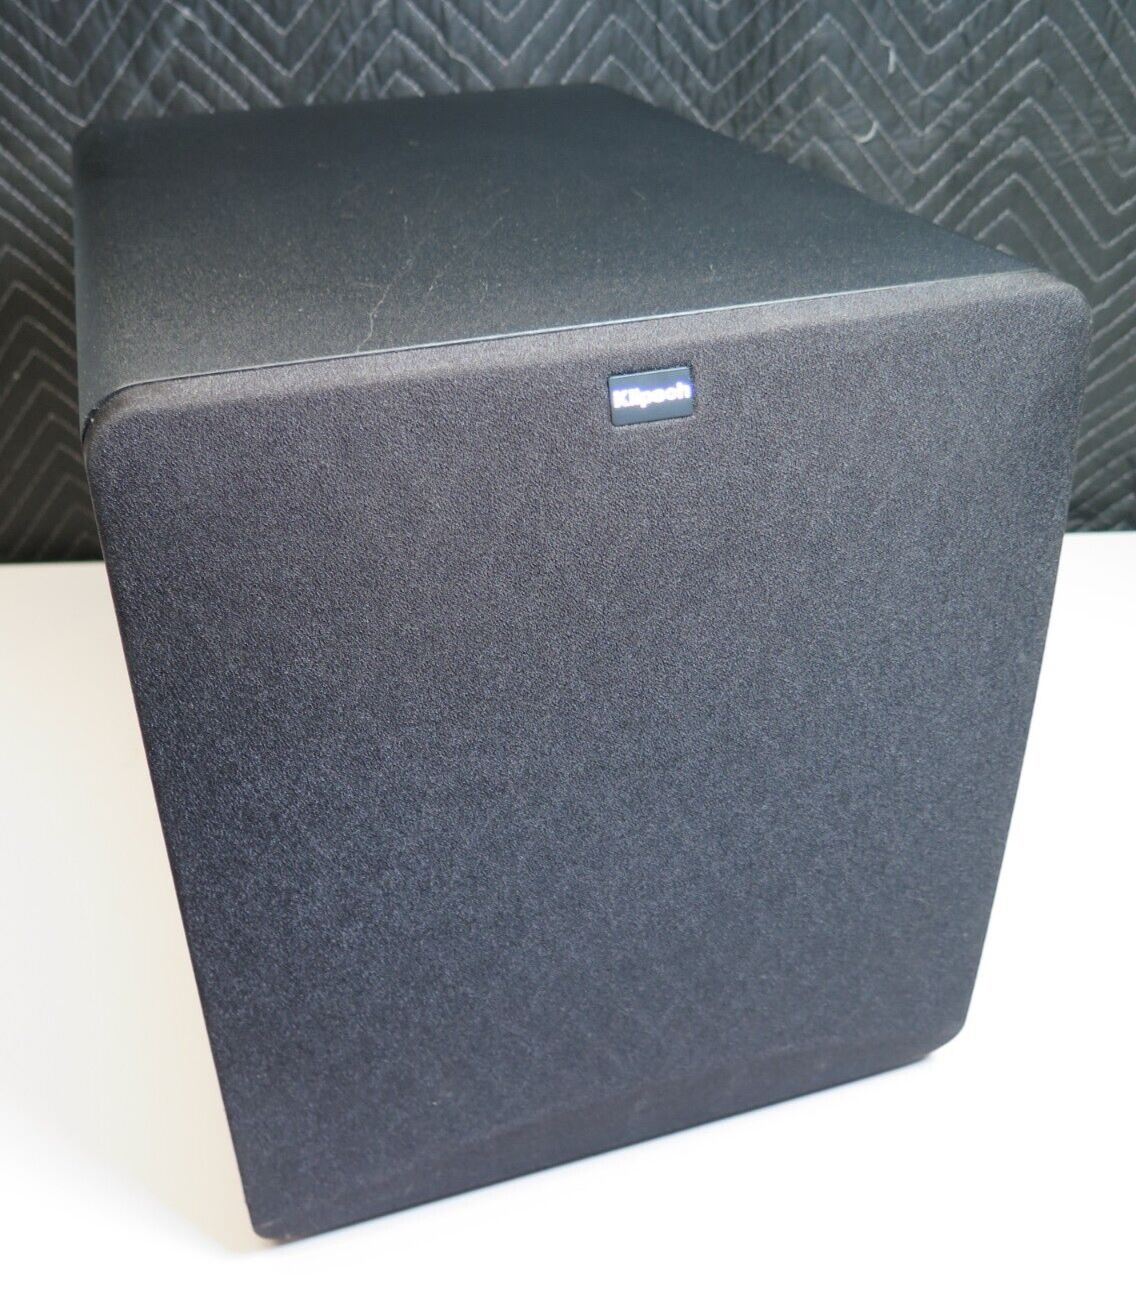 Klipsch SW-110 Powered Subwoofer w/ Owners Manual